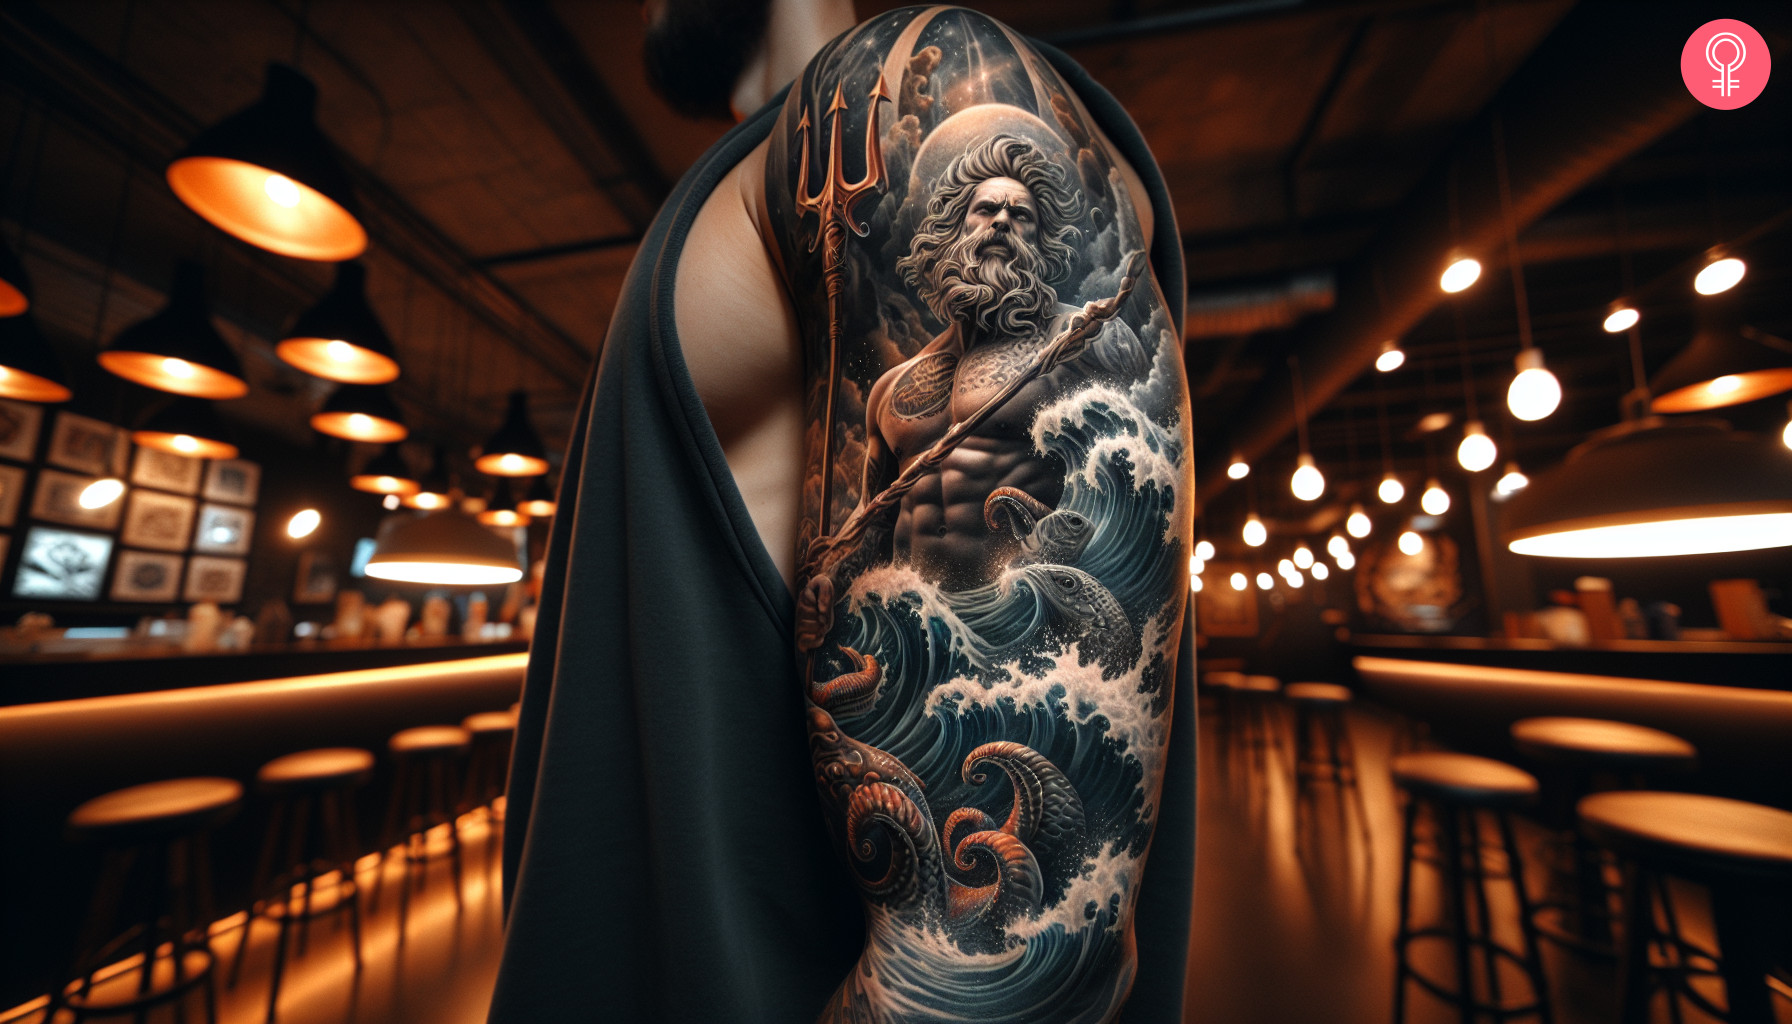 A Neptune god tattoo design on the arm of a man